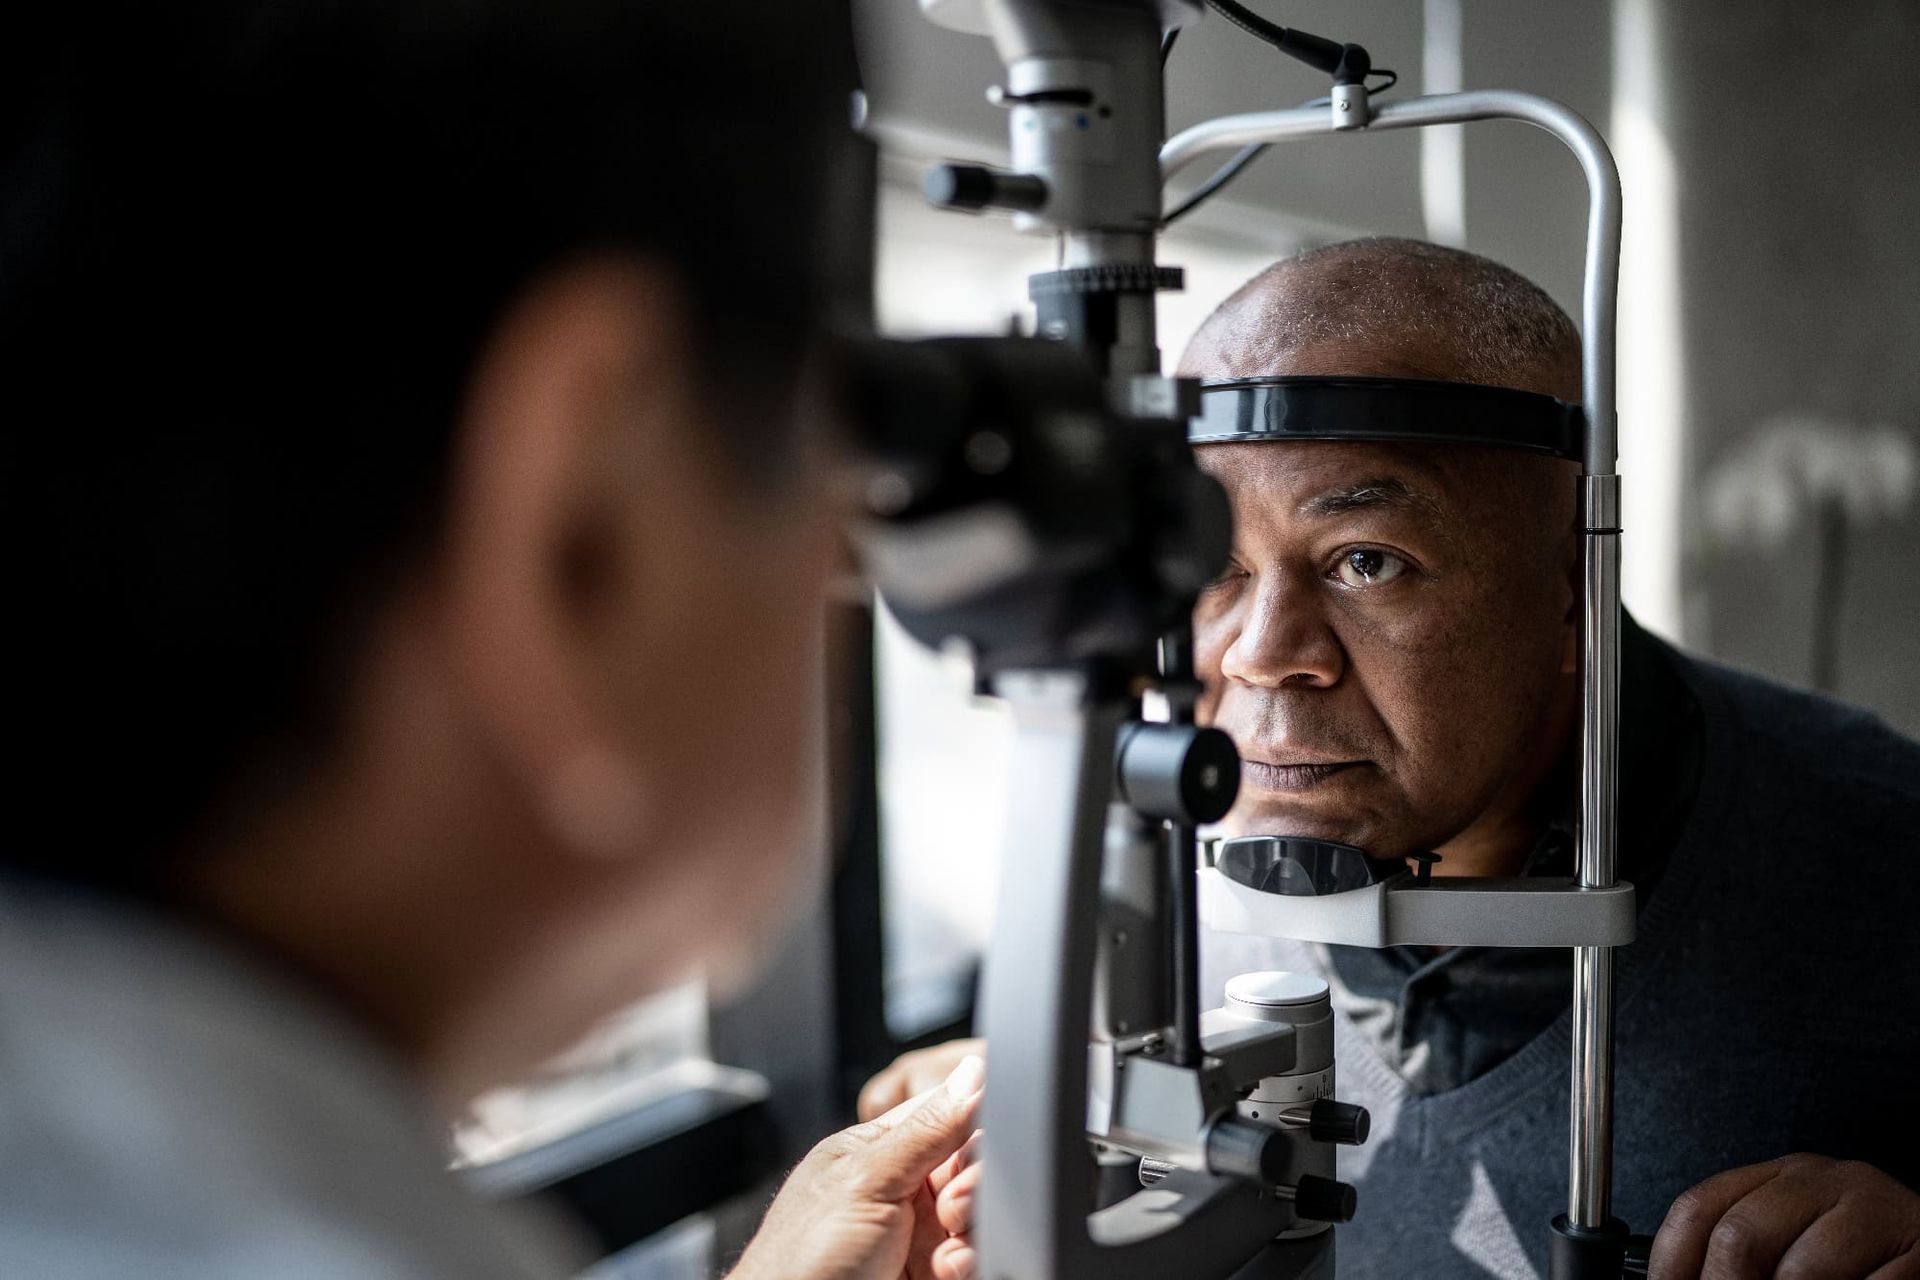 A man is getting his eyes examined by an ophthalmologist.